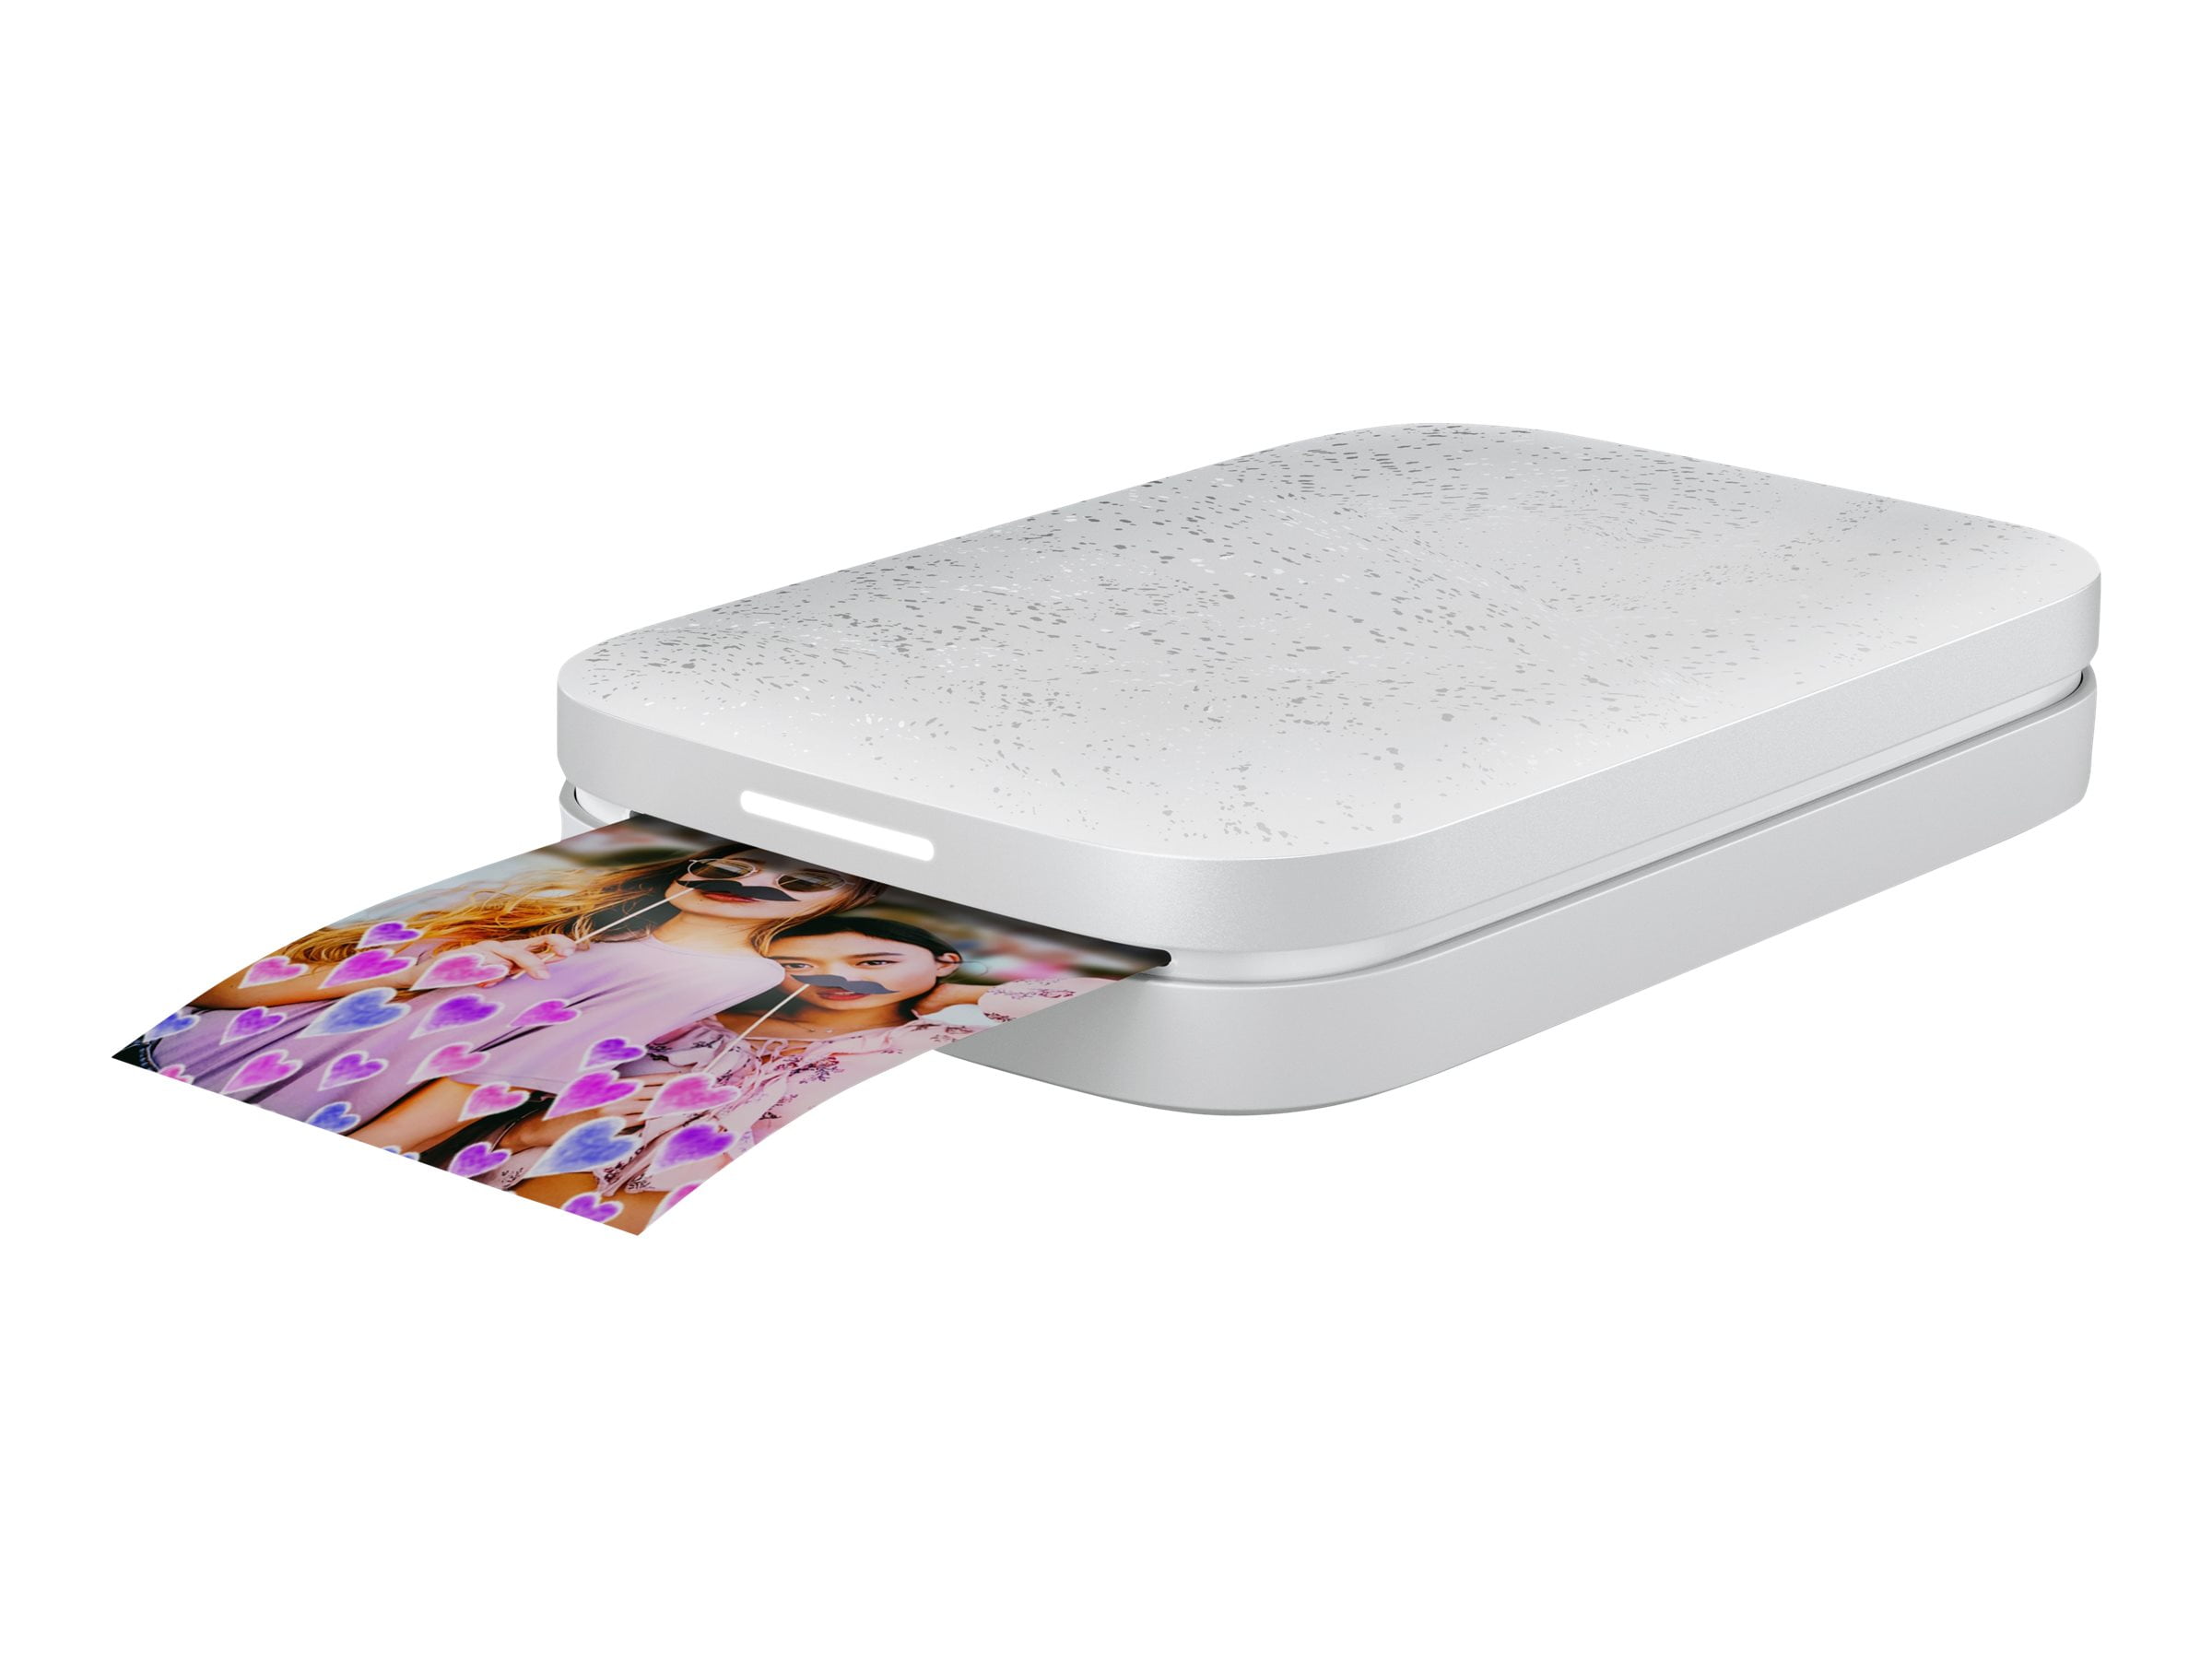 HP Sprocket Portable 2x3" Instant Photo Printer (Luna Pearl), for Ios or Android - image 1 of 8